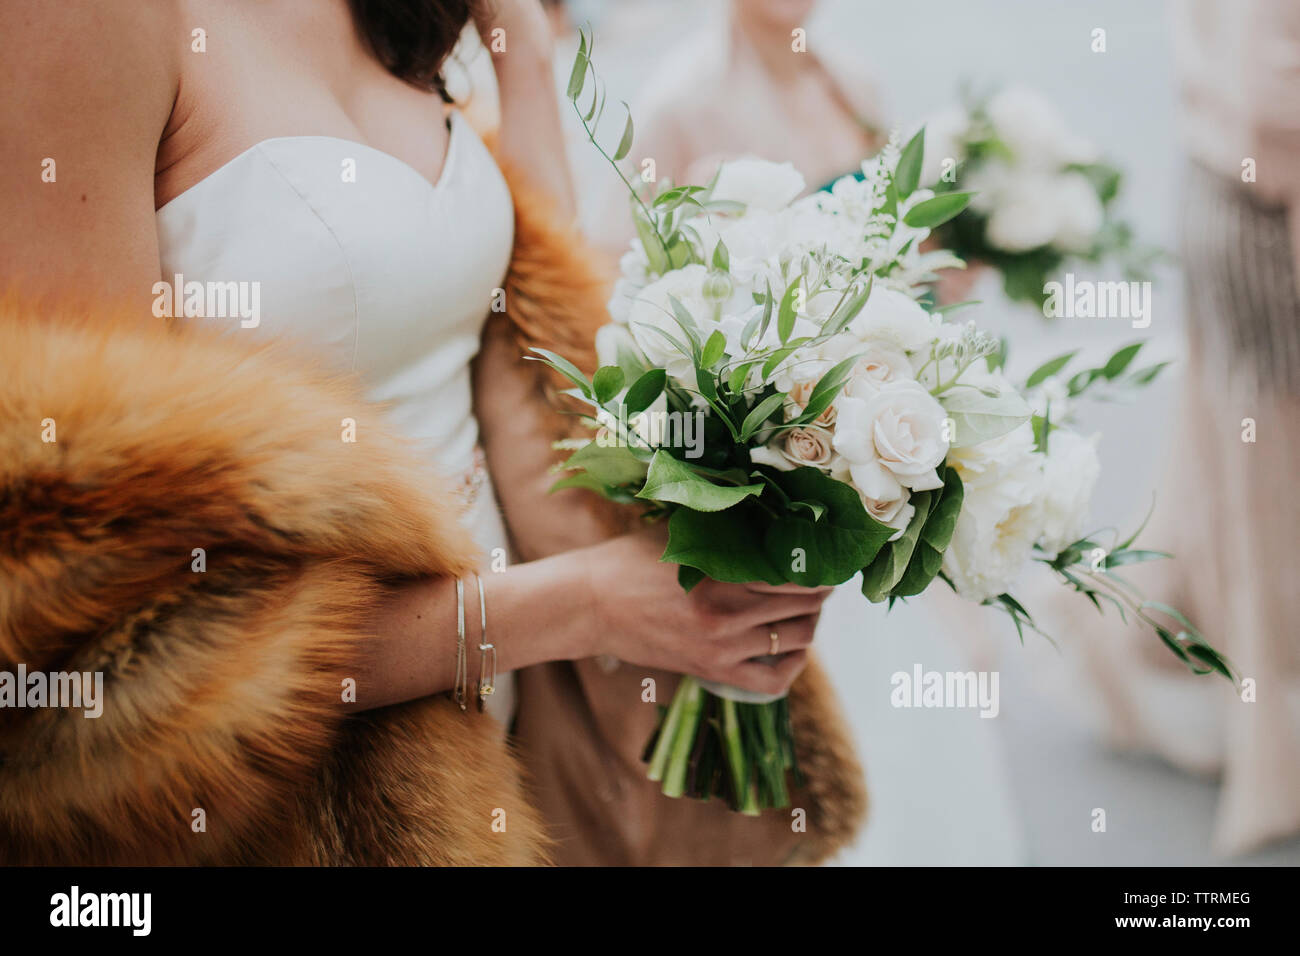 Midsection of bride with fur holding bouquet during wedding ceremony Stock Photo